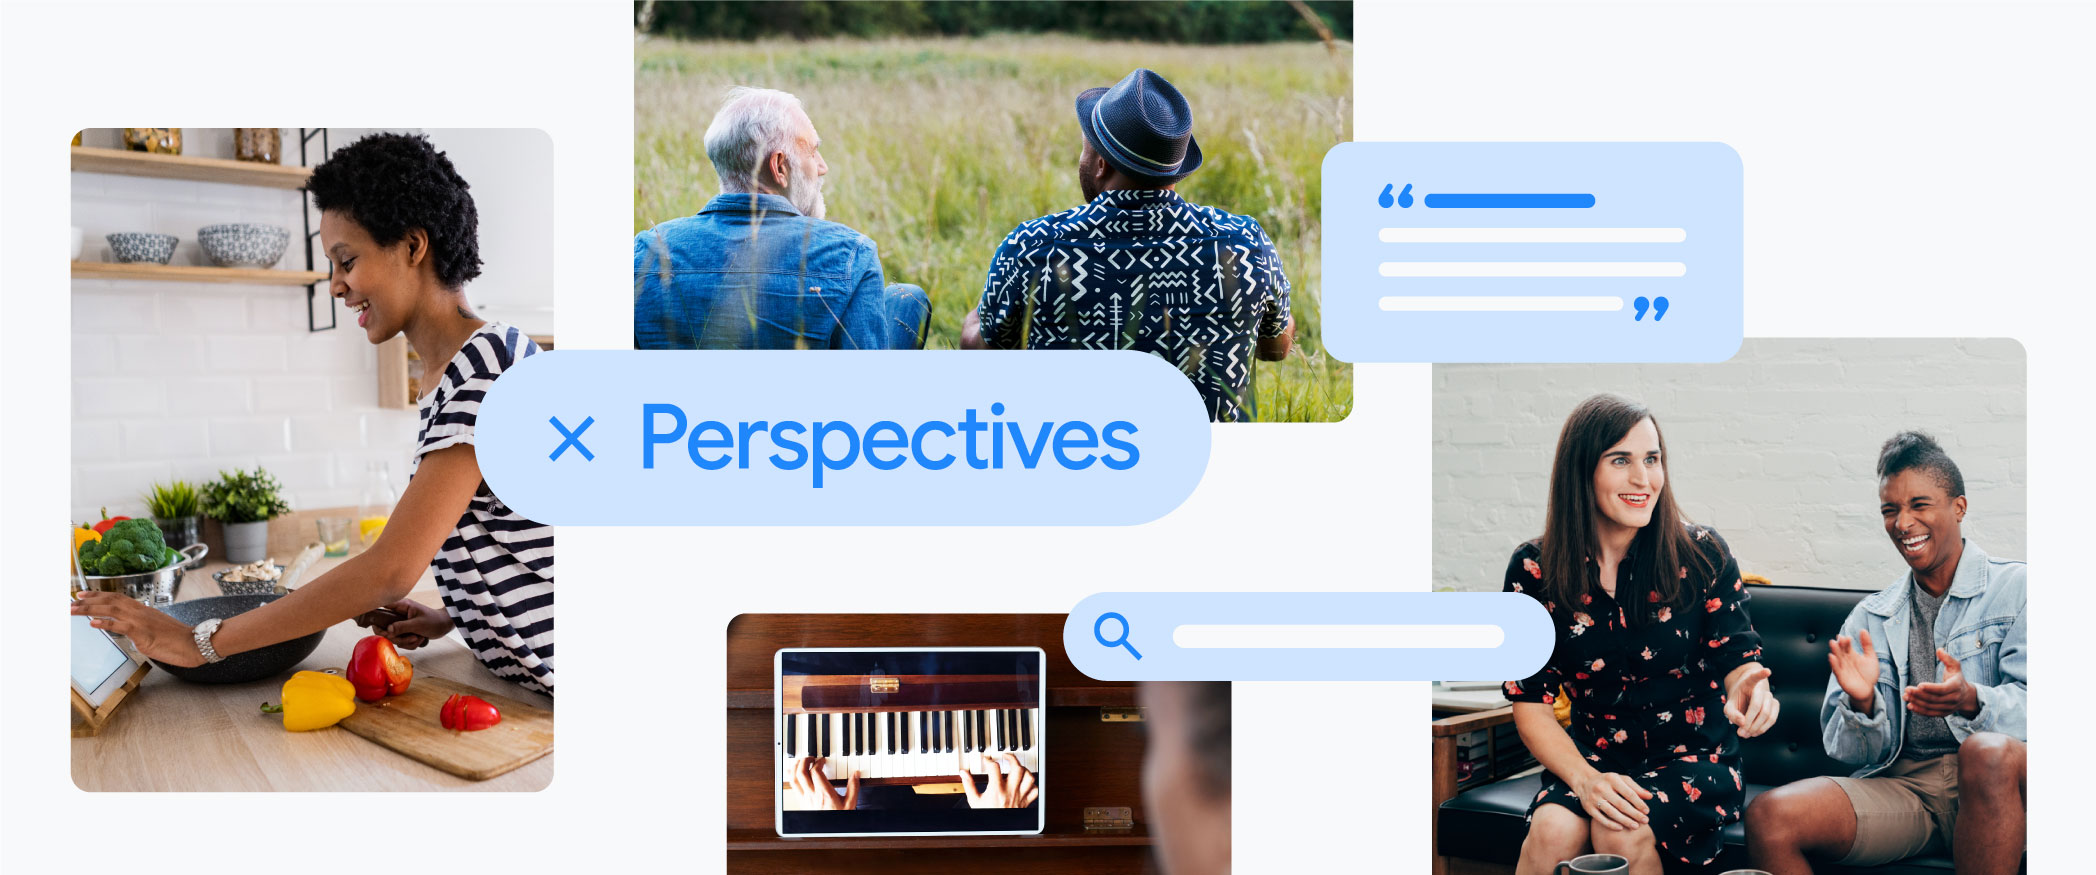 Google Search update: New perspectives and experiences